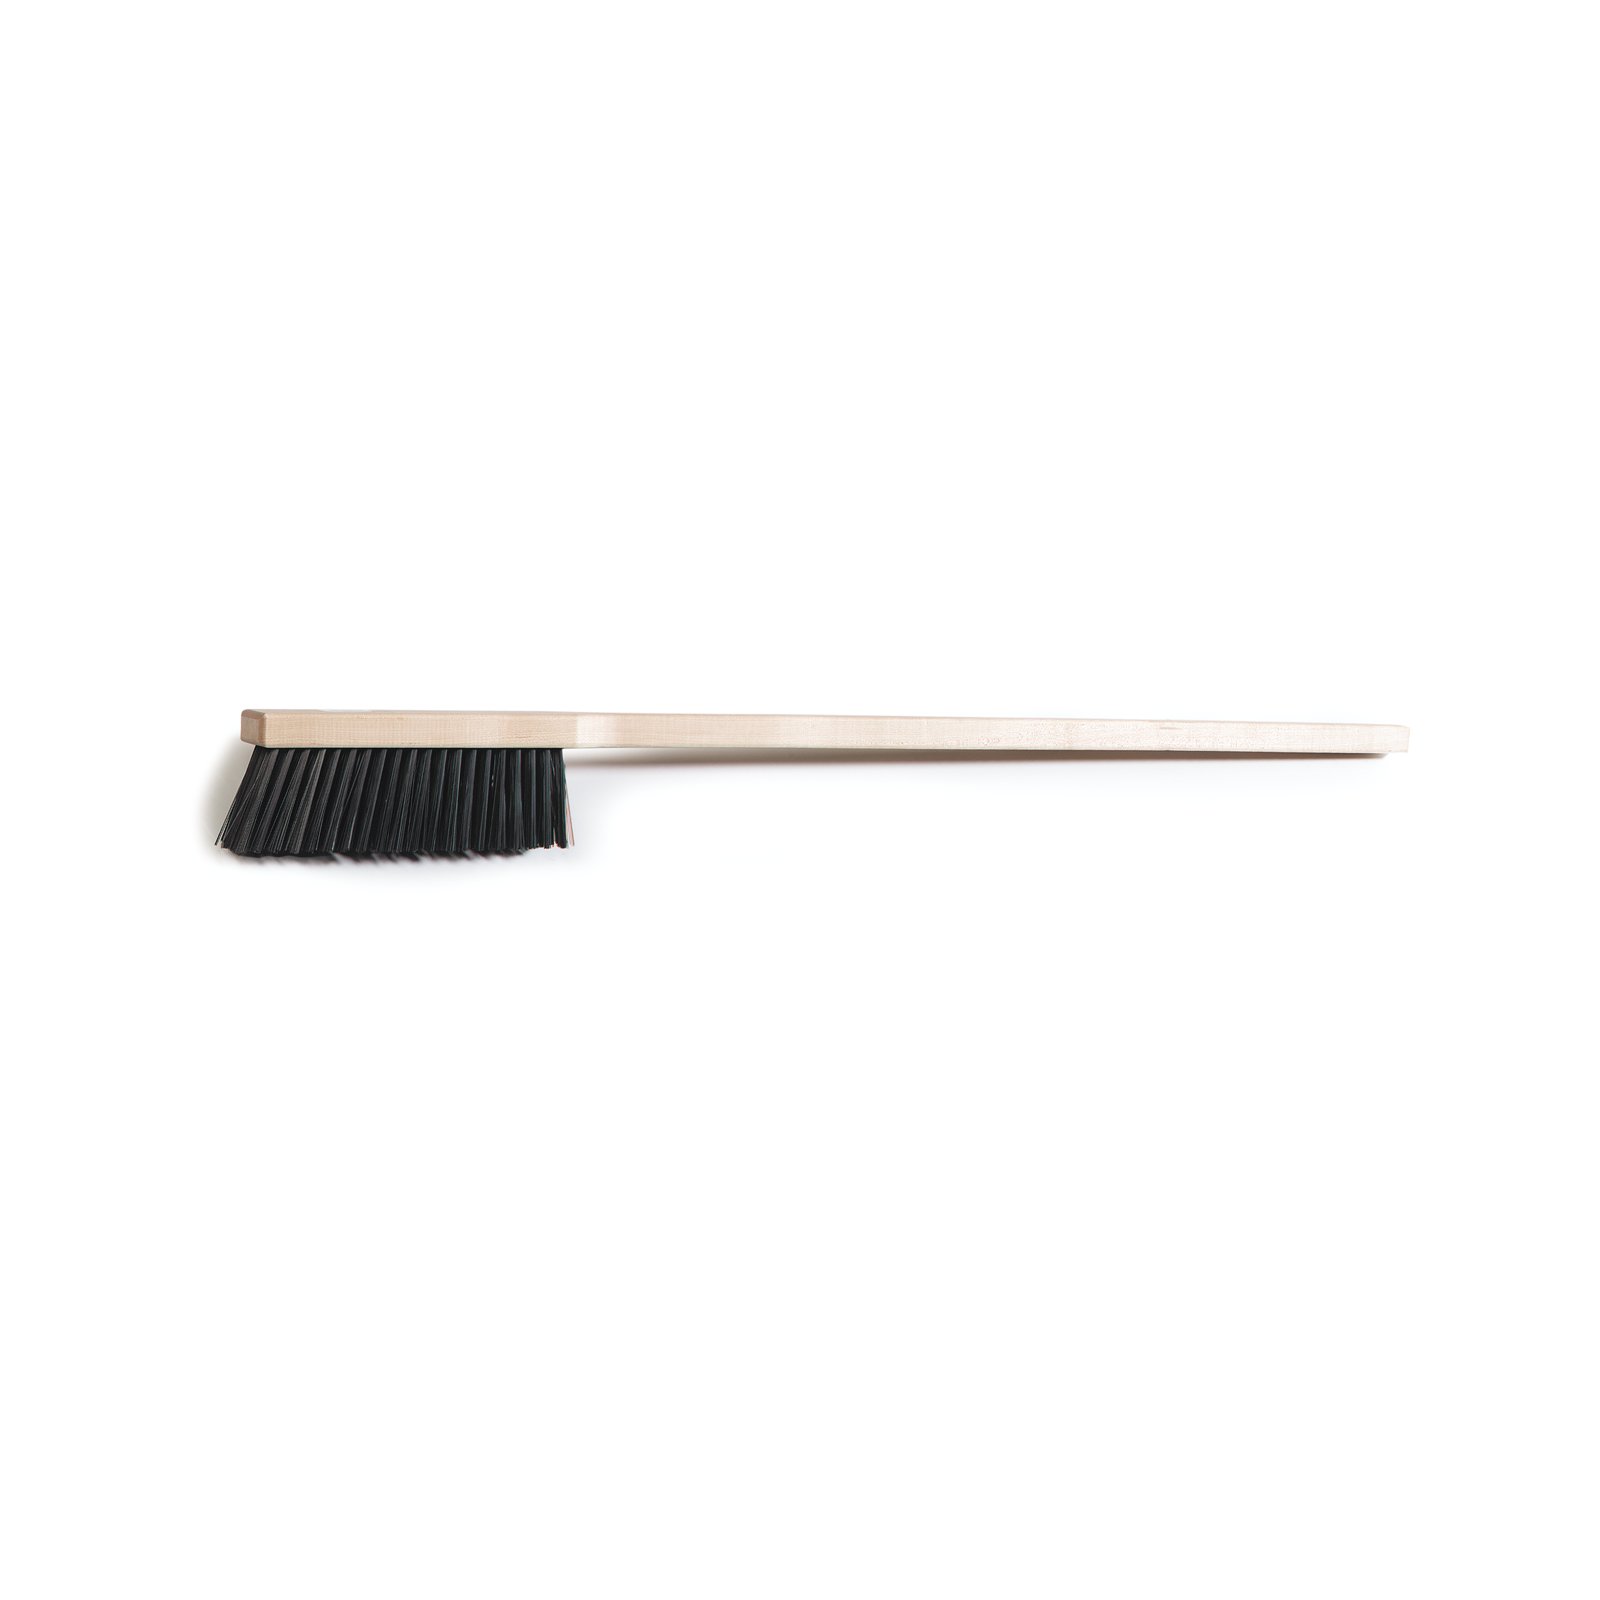 Oven Brush Natural Fiber Bristles With Rotating Head and Rear Stainless  Steel Scraper - Brush Size 20 x 6 x 11h cm Aluminum Handle 200 cm